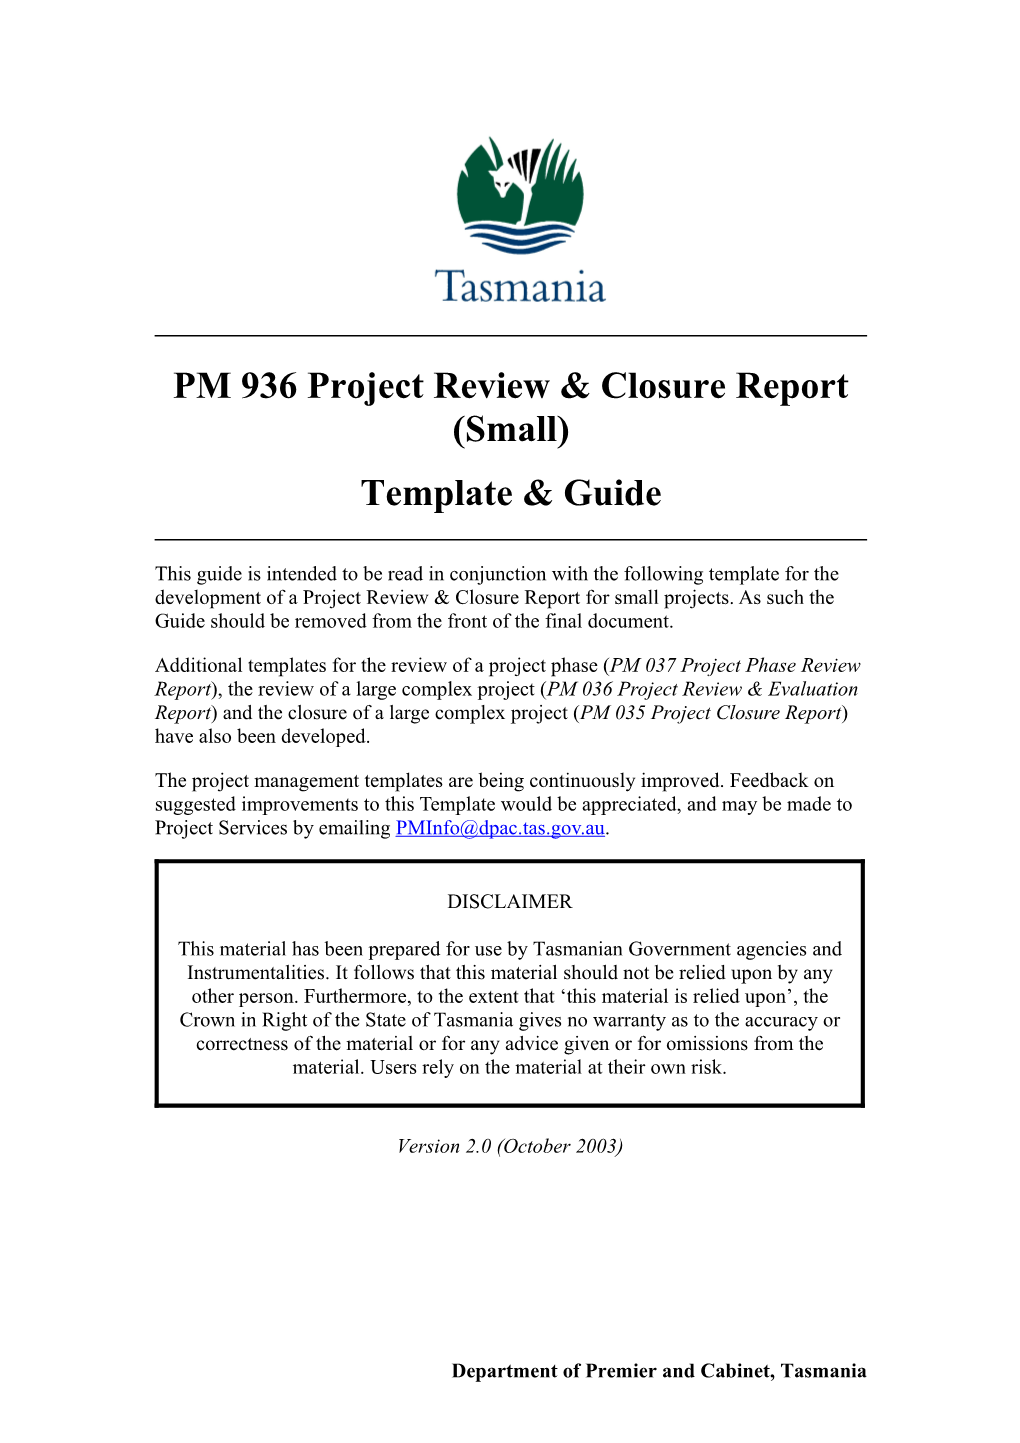 Tasmanian Government Project Management - Project Review and Closure Report